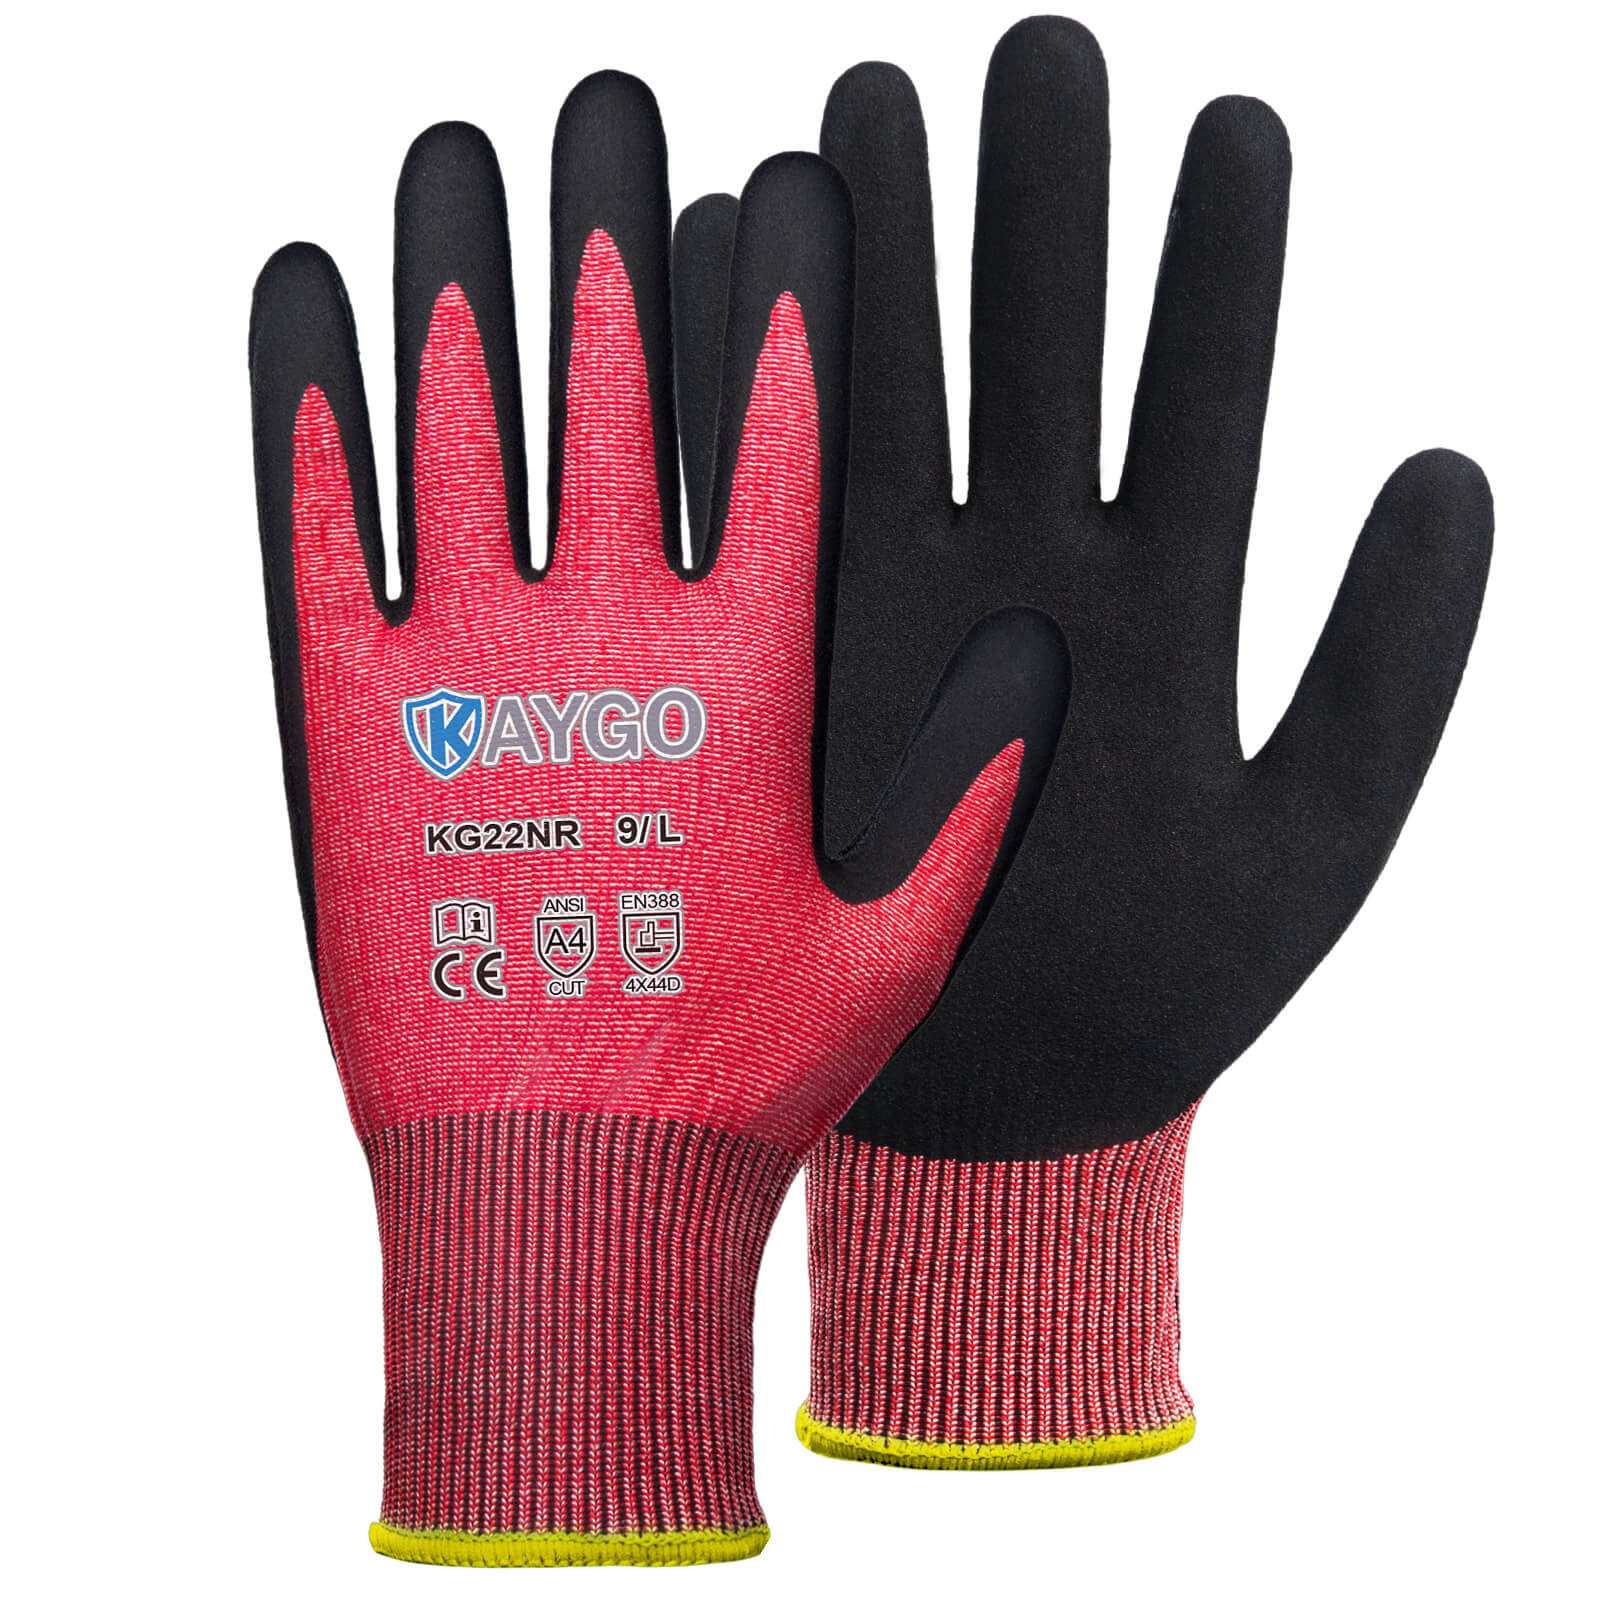 Seamless Knit Cut Resistant Work Gloves with Nitrile Coated on Palm & Fingers